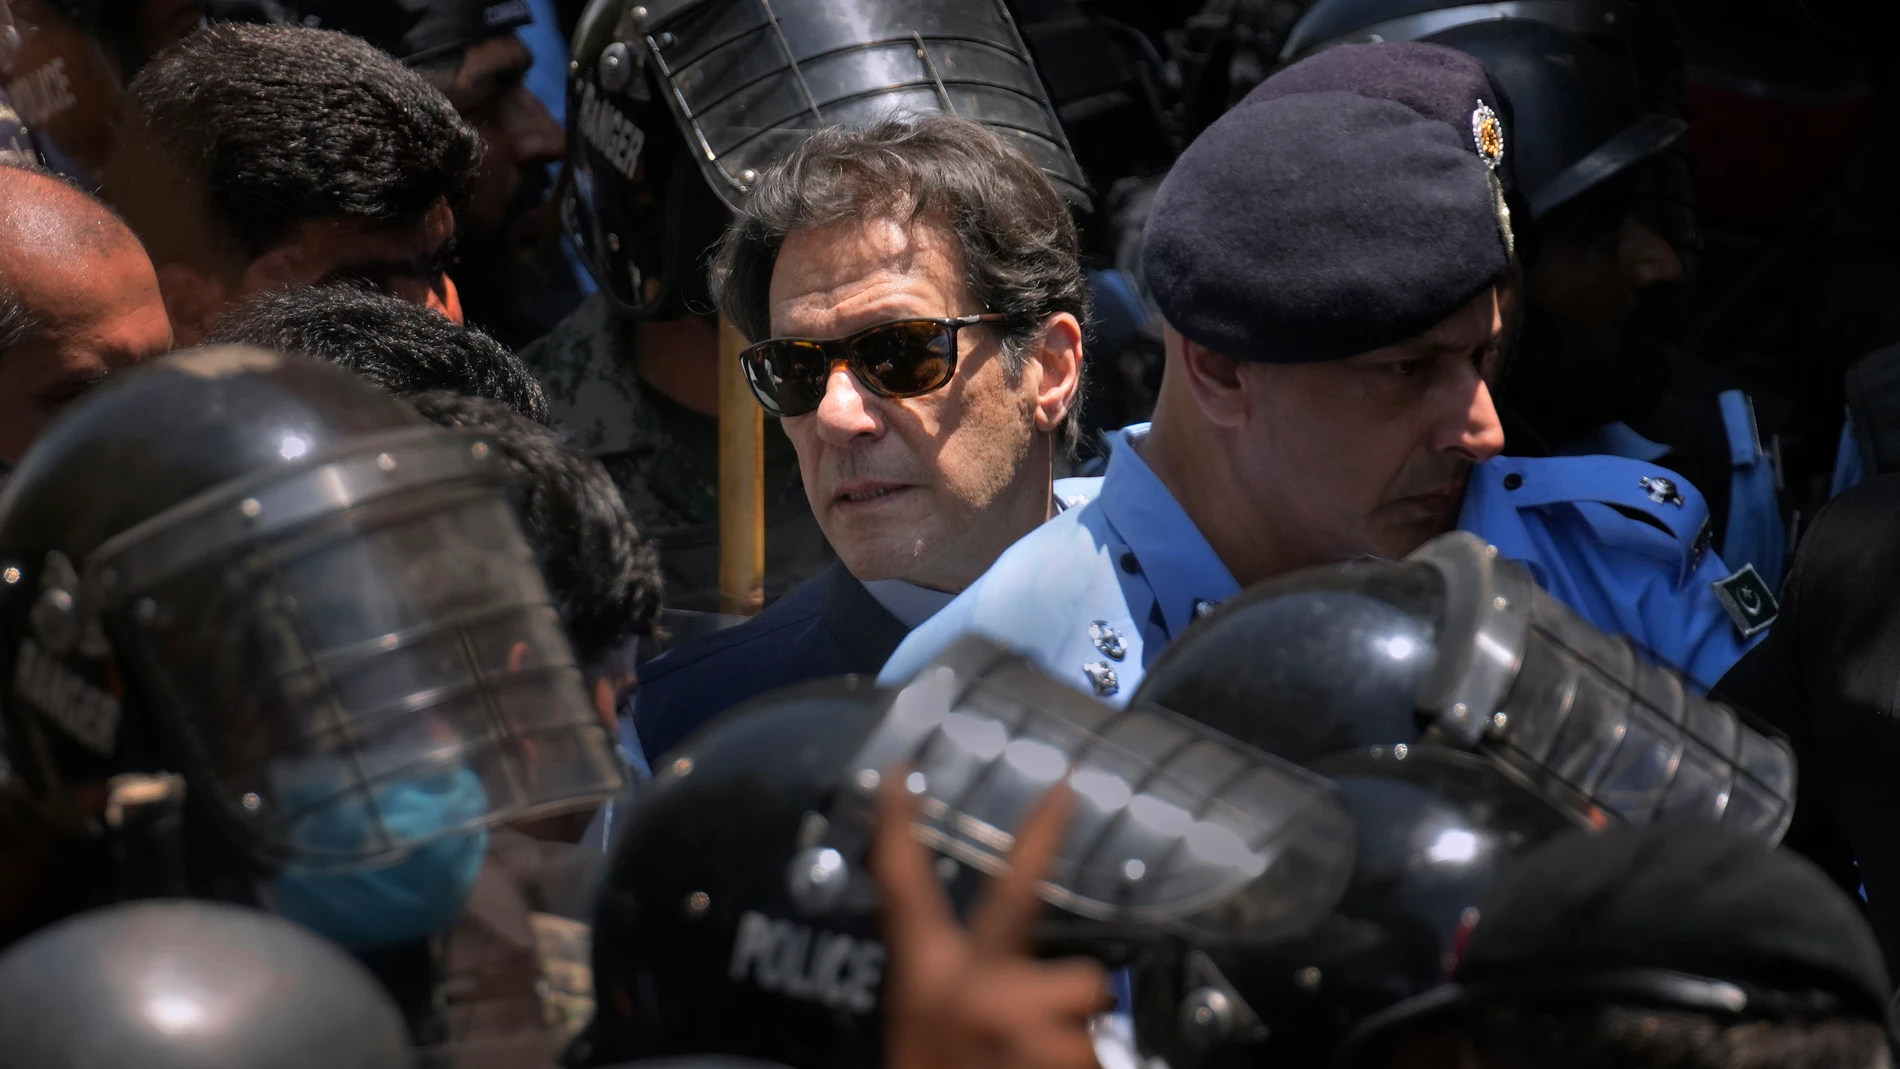 Pakistan's former Prime Minister Imran Khan, center, is escorted by police officers as he arrives to appear in a court, in Islamabad, Pakistan, Friday, May 12, 2023. A high court in Islamabad has granted Khan a two-week reprieve from arrest in a graft case and granted him bail on the charge. (AP Photo/Anjum Naveed)